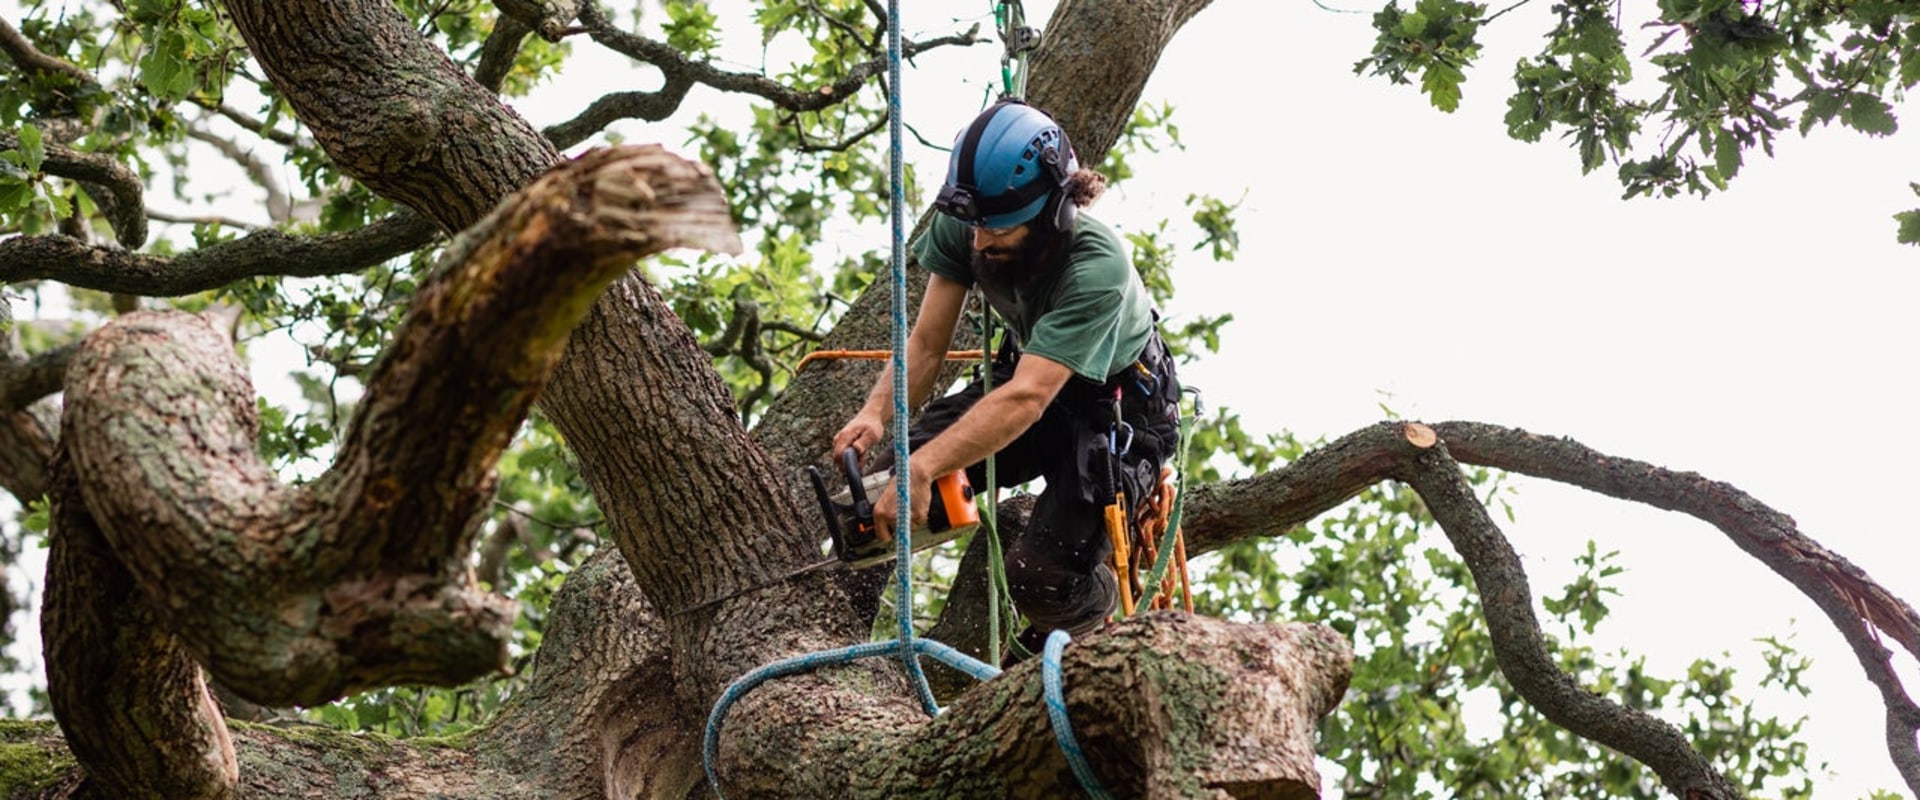 The Potential Dangers of Residential Tree Removal